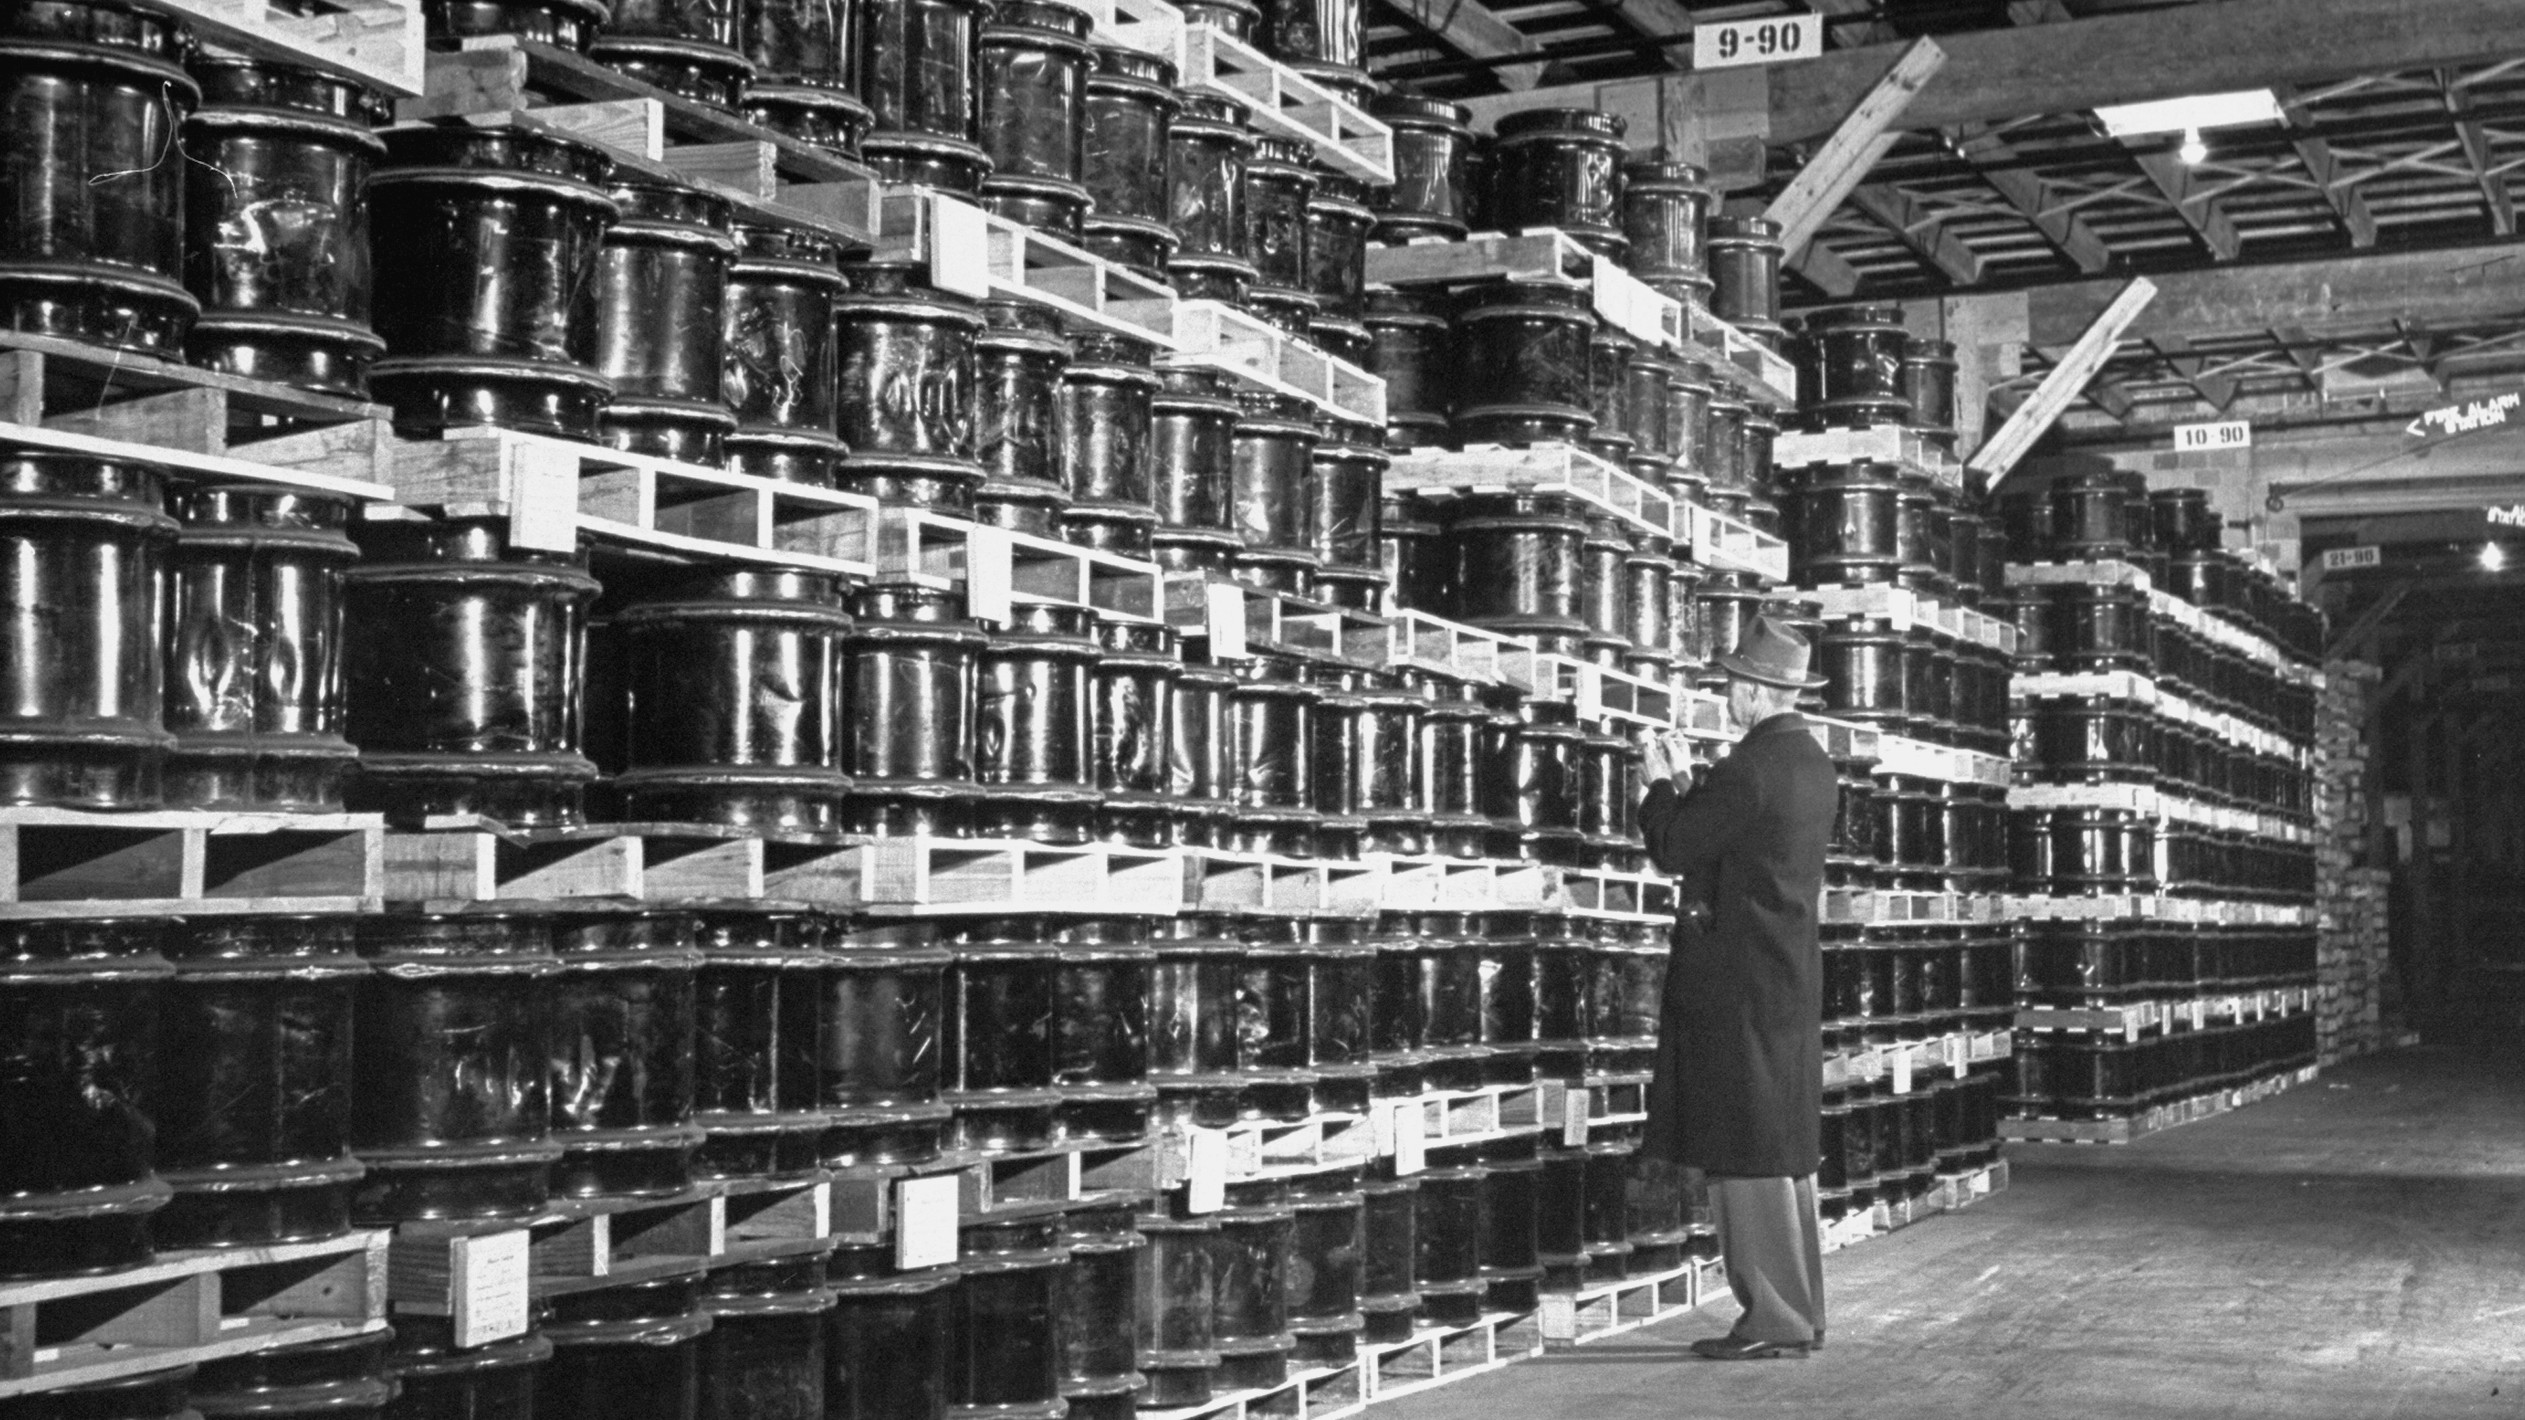 Manganese that is part of the U.S. strategic materials stockpile, is stored in a large quantity in this warehouse.  (Ed Clark/The LIFE Picture Collection/Getty Images)